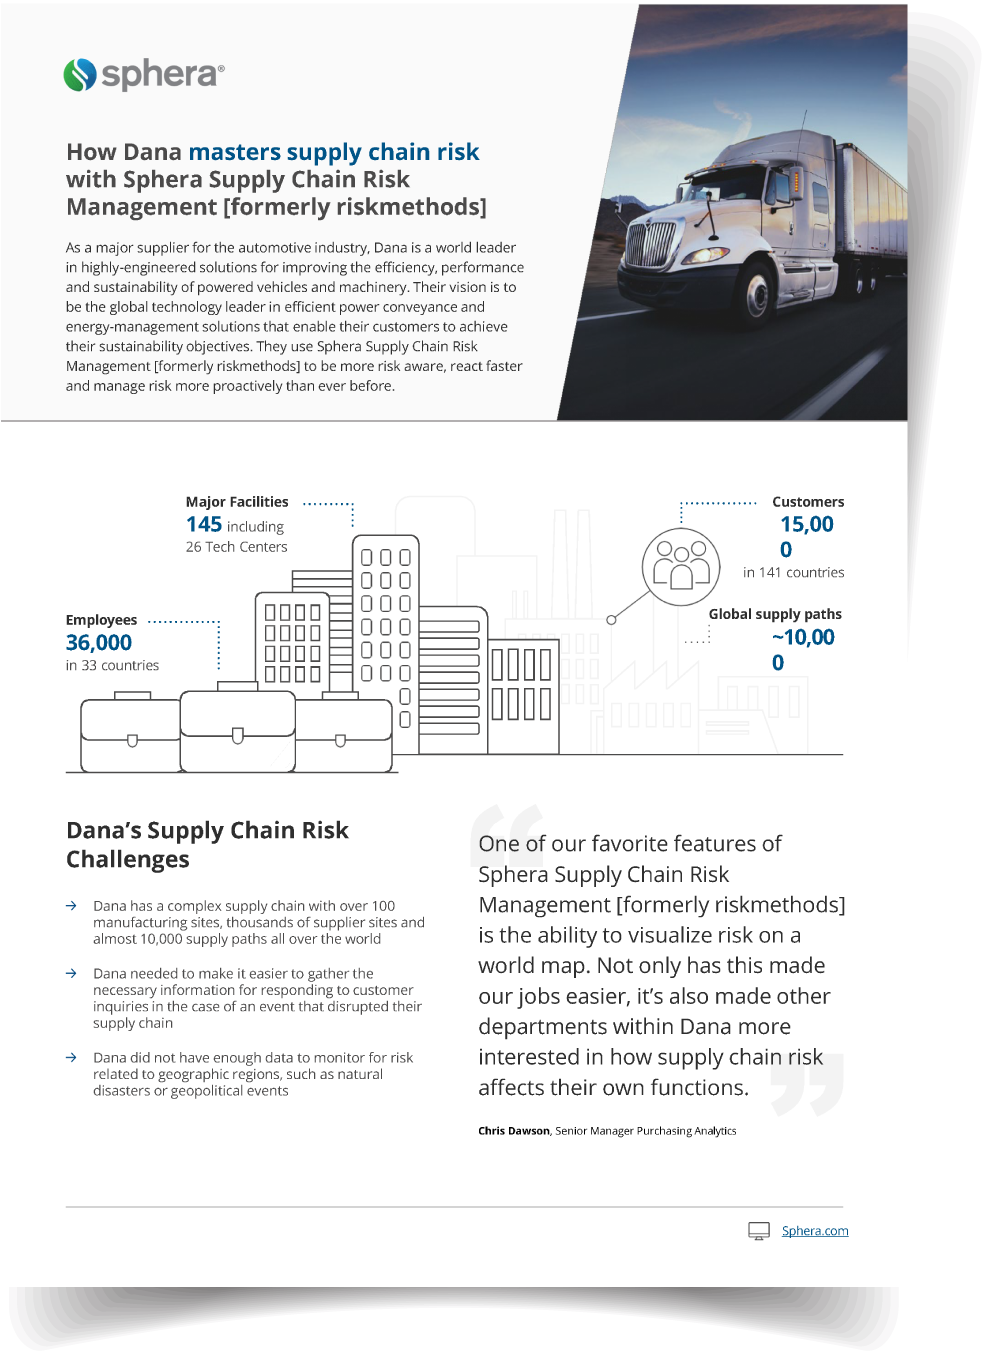 How Dana Masters Supply Chain Risk with Sphera Supply Chain Risk Management [formerly riskmethods]